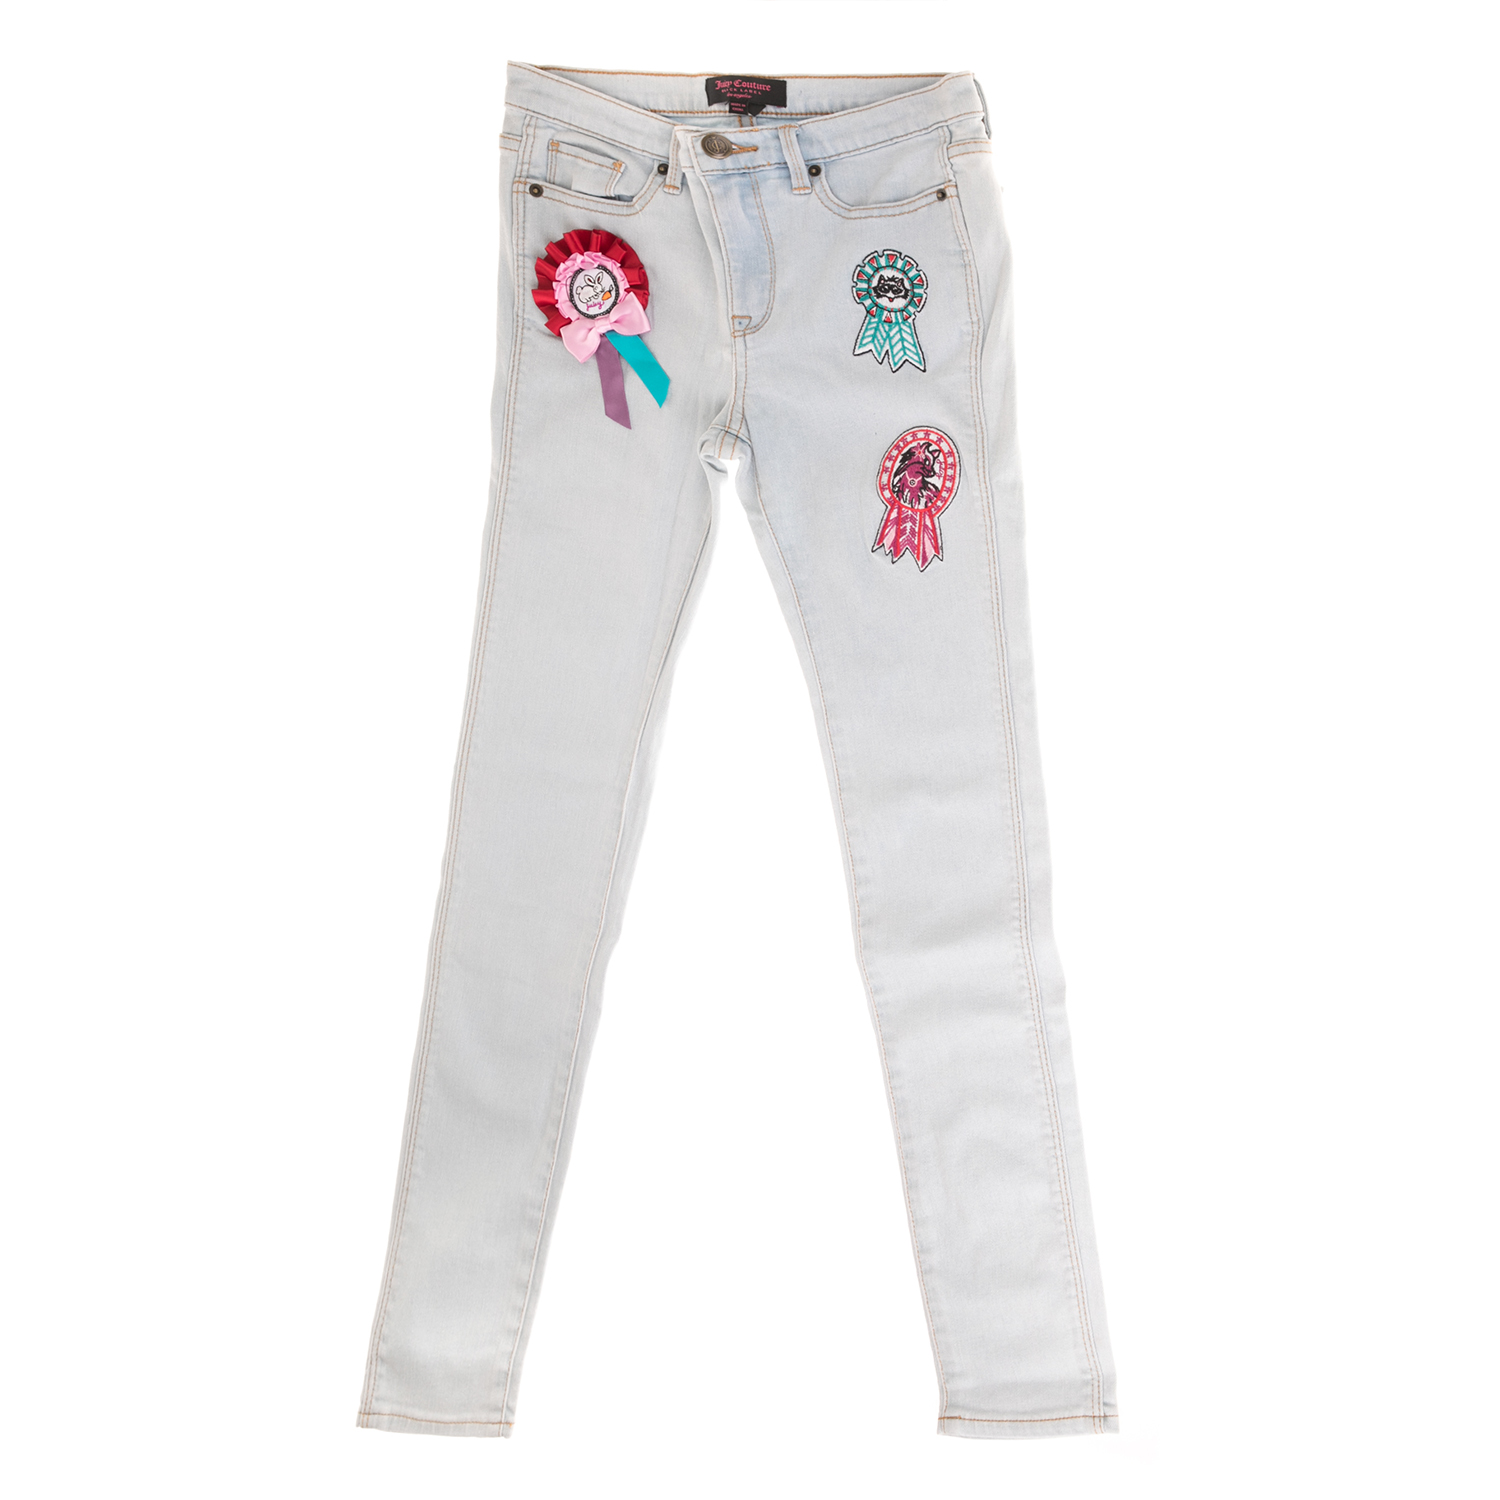 JUICY COUTURE KIDS Παιδικό παντελόνι JUICY COUTURE KIDS DNM WOODLAND WINNERS EMBROIDER μπλε